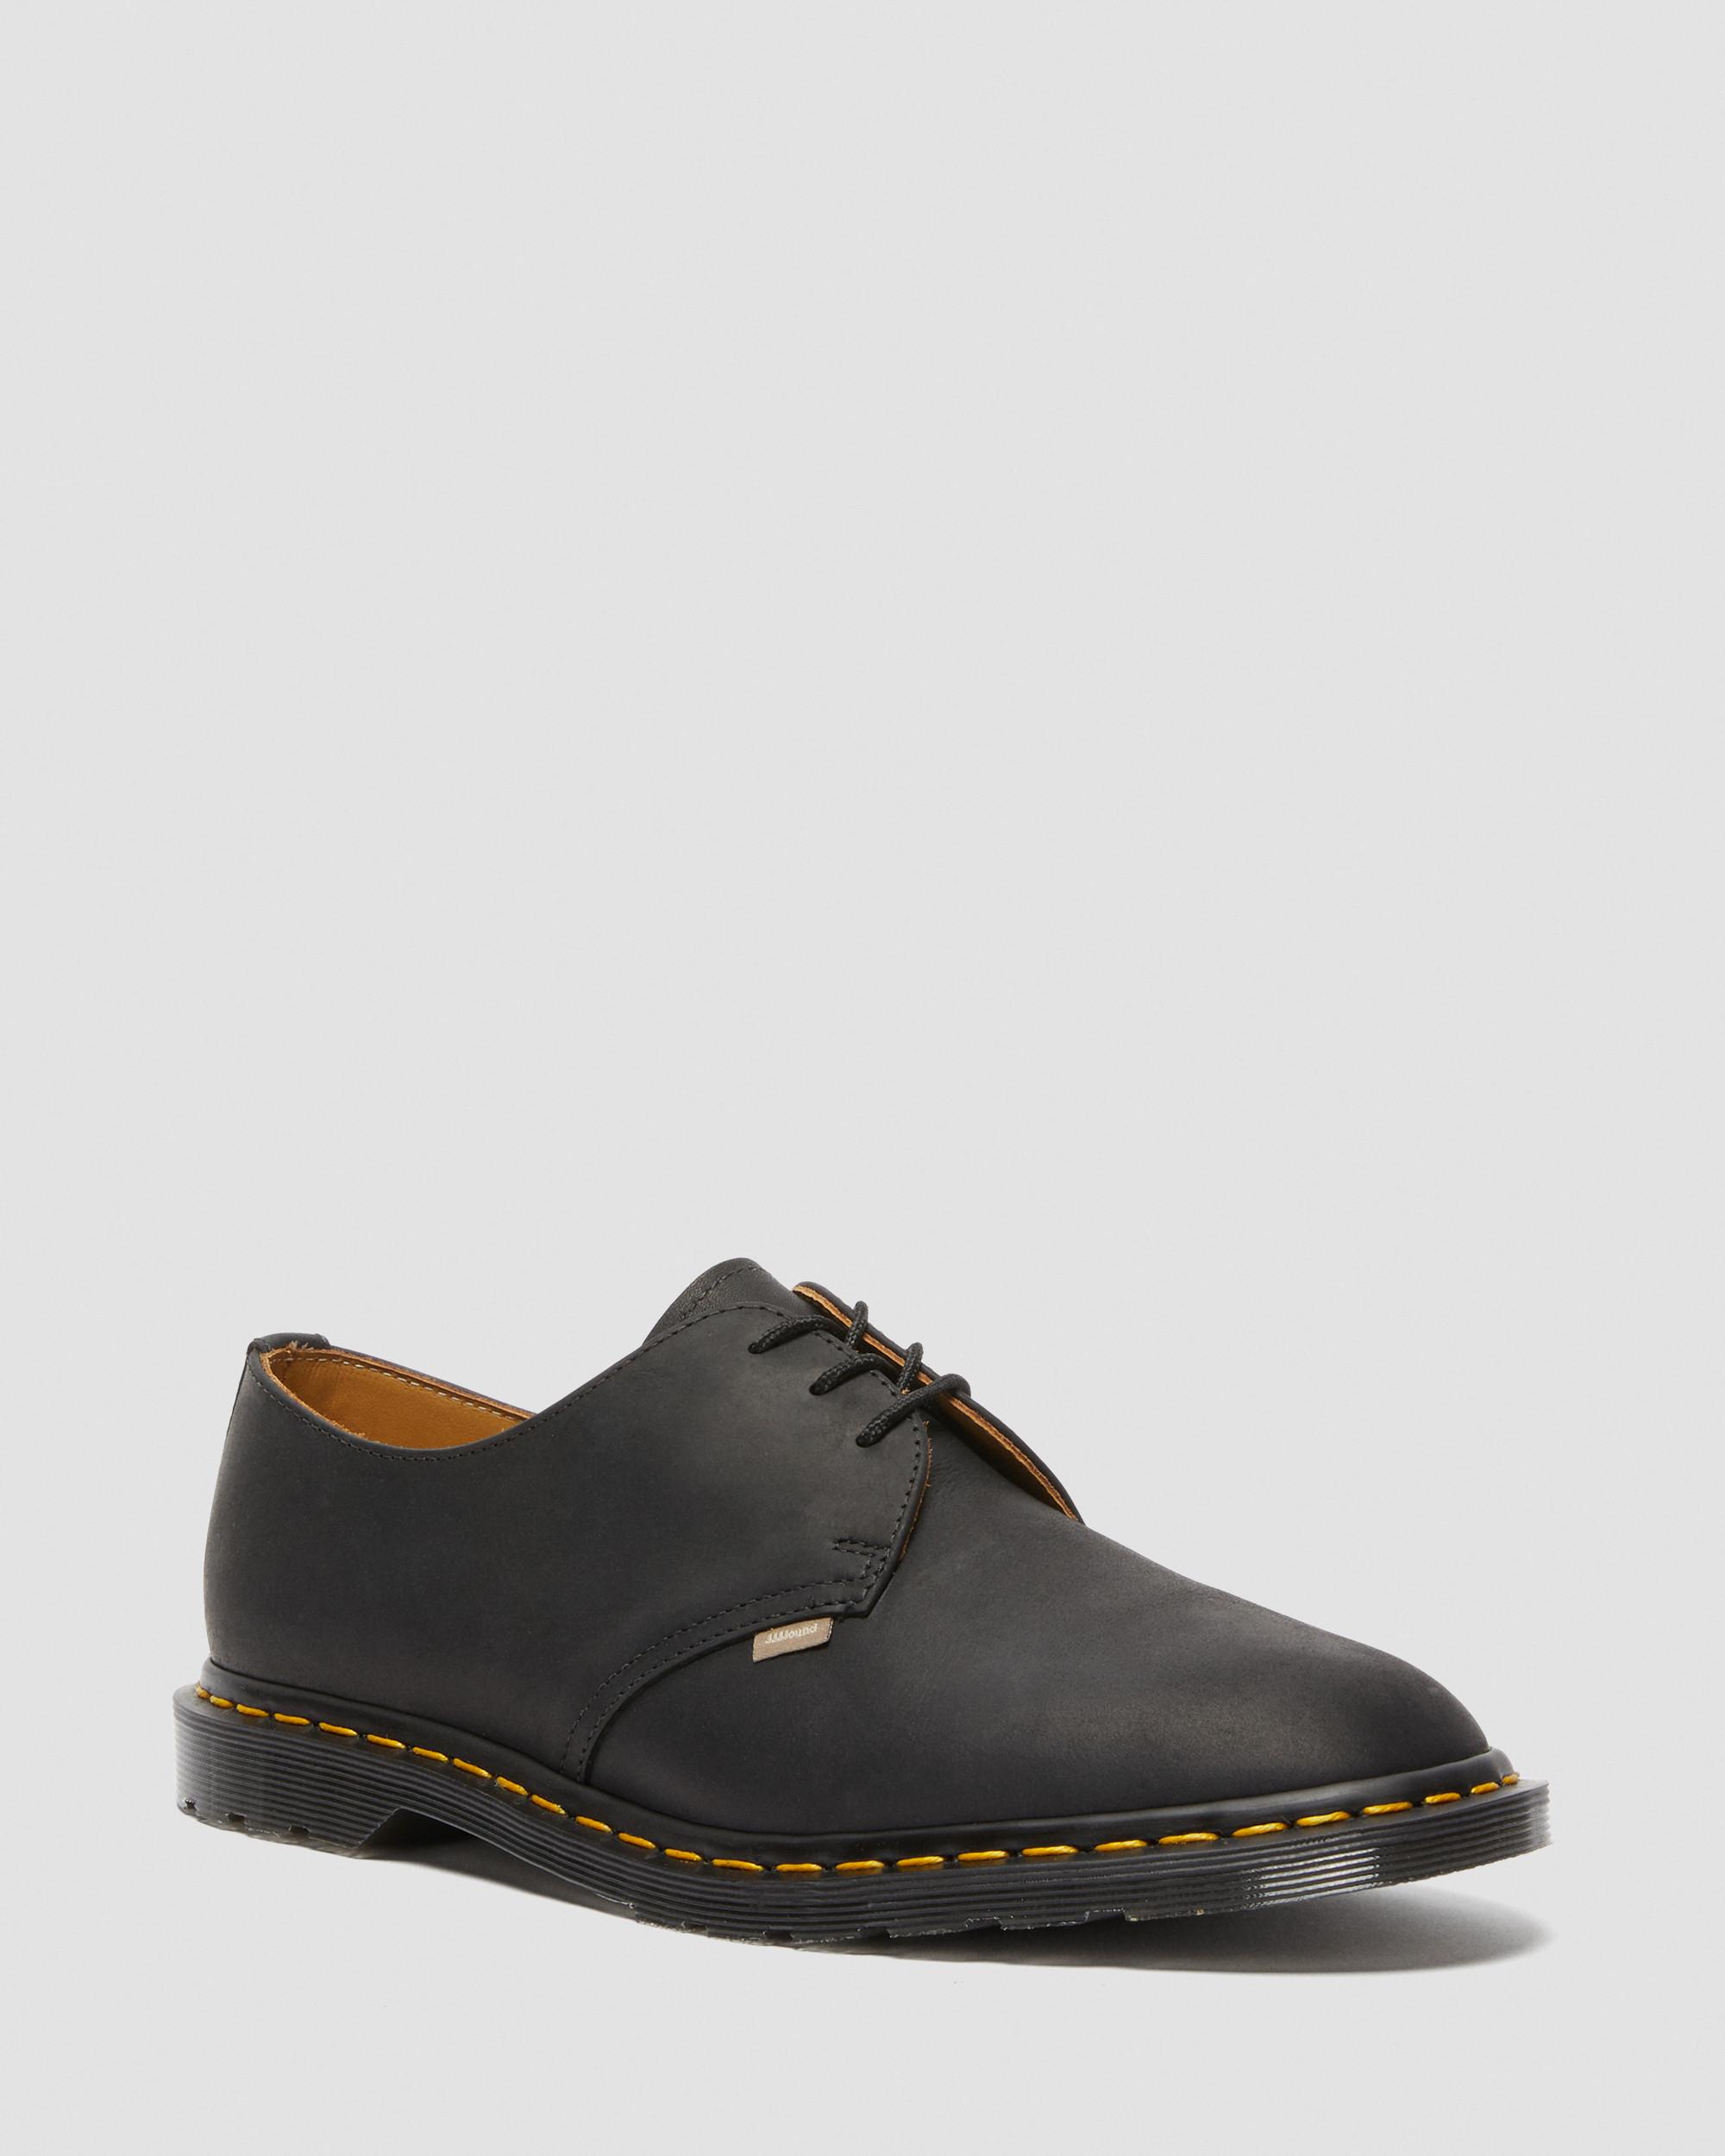 JJJJOUND ARCHIE II Wyoming Leather Shoes in Black